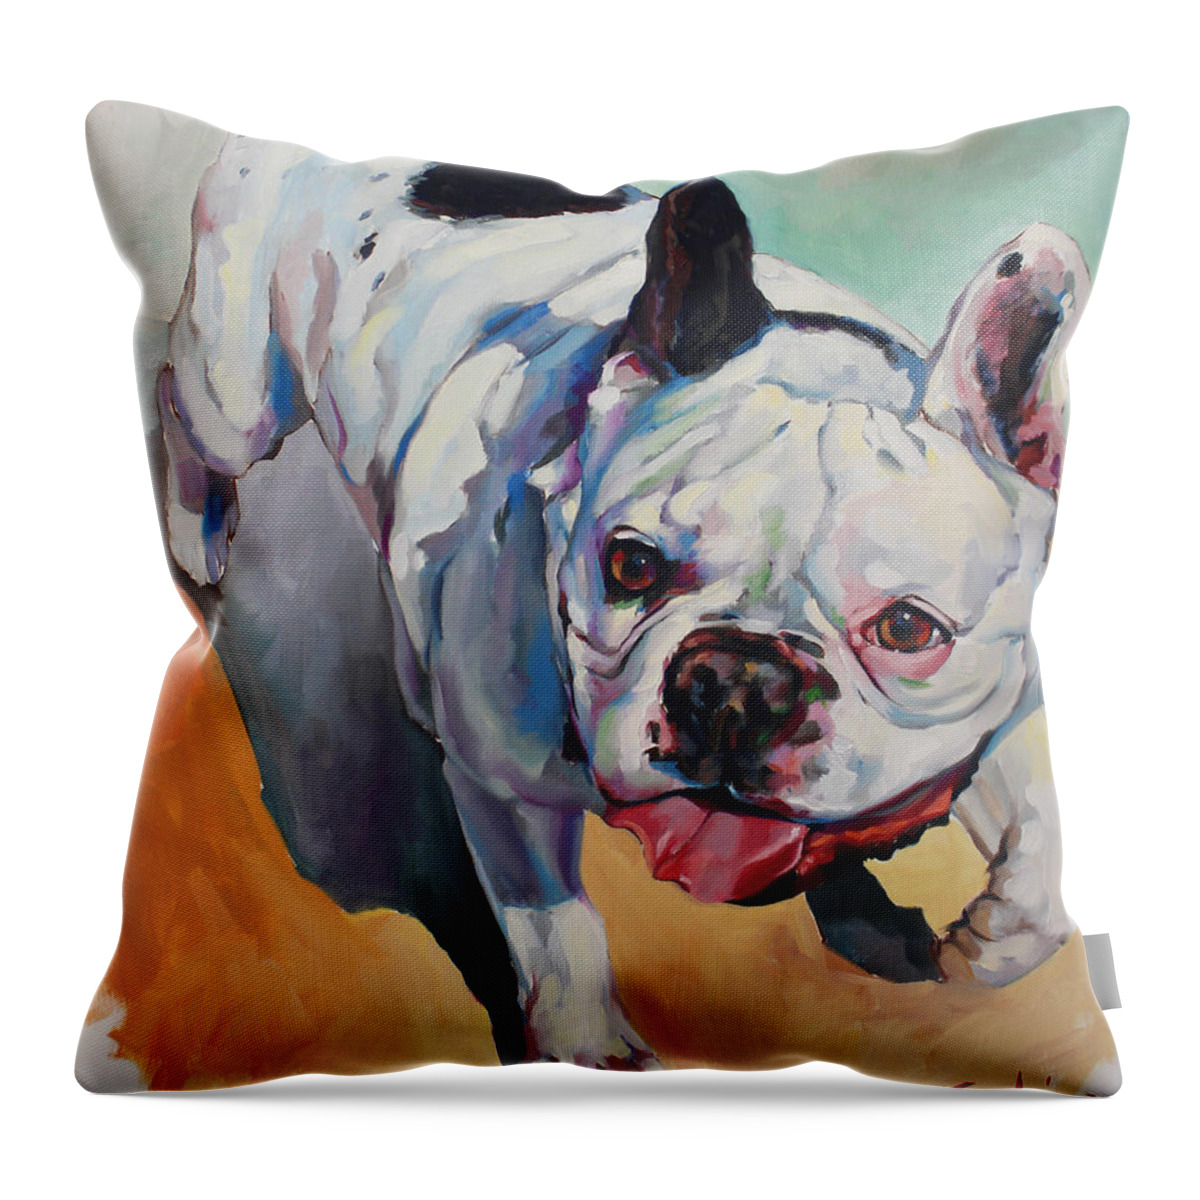 Pugs Throw Pillow featuring the painting Miki by Tachi Pintor